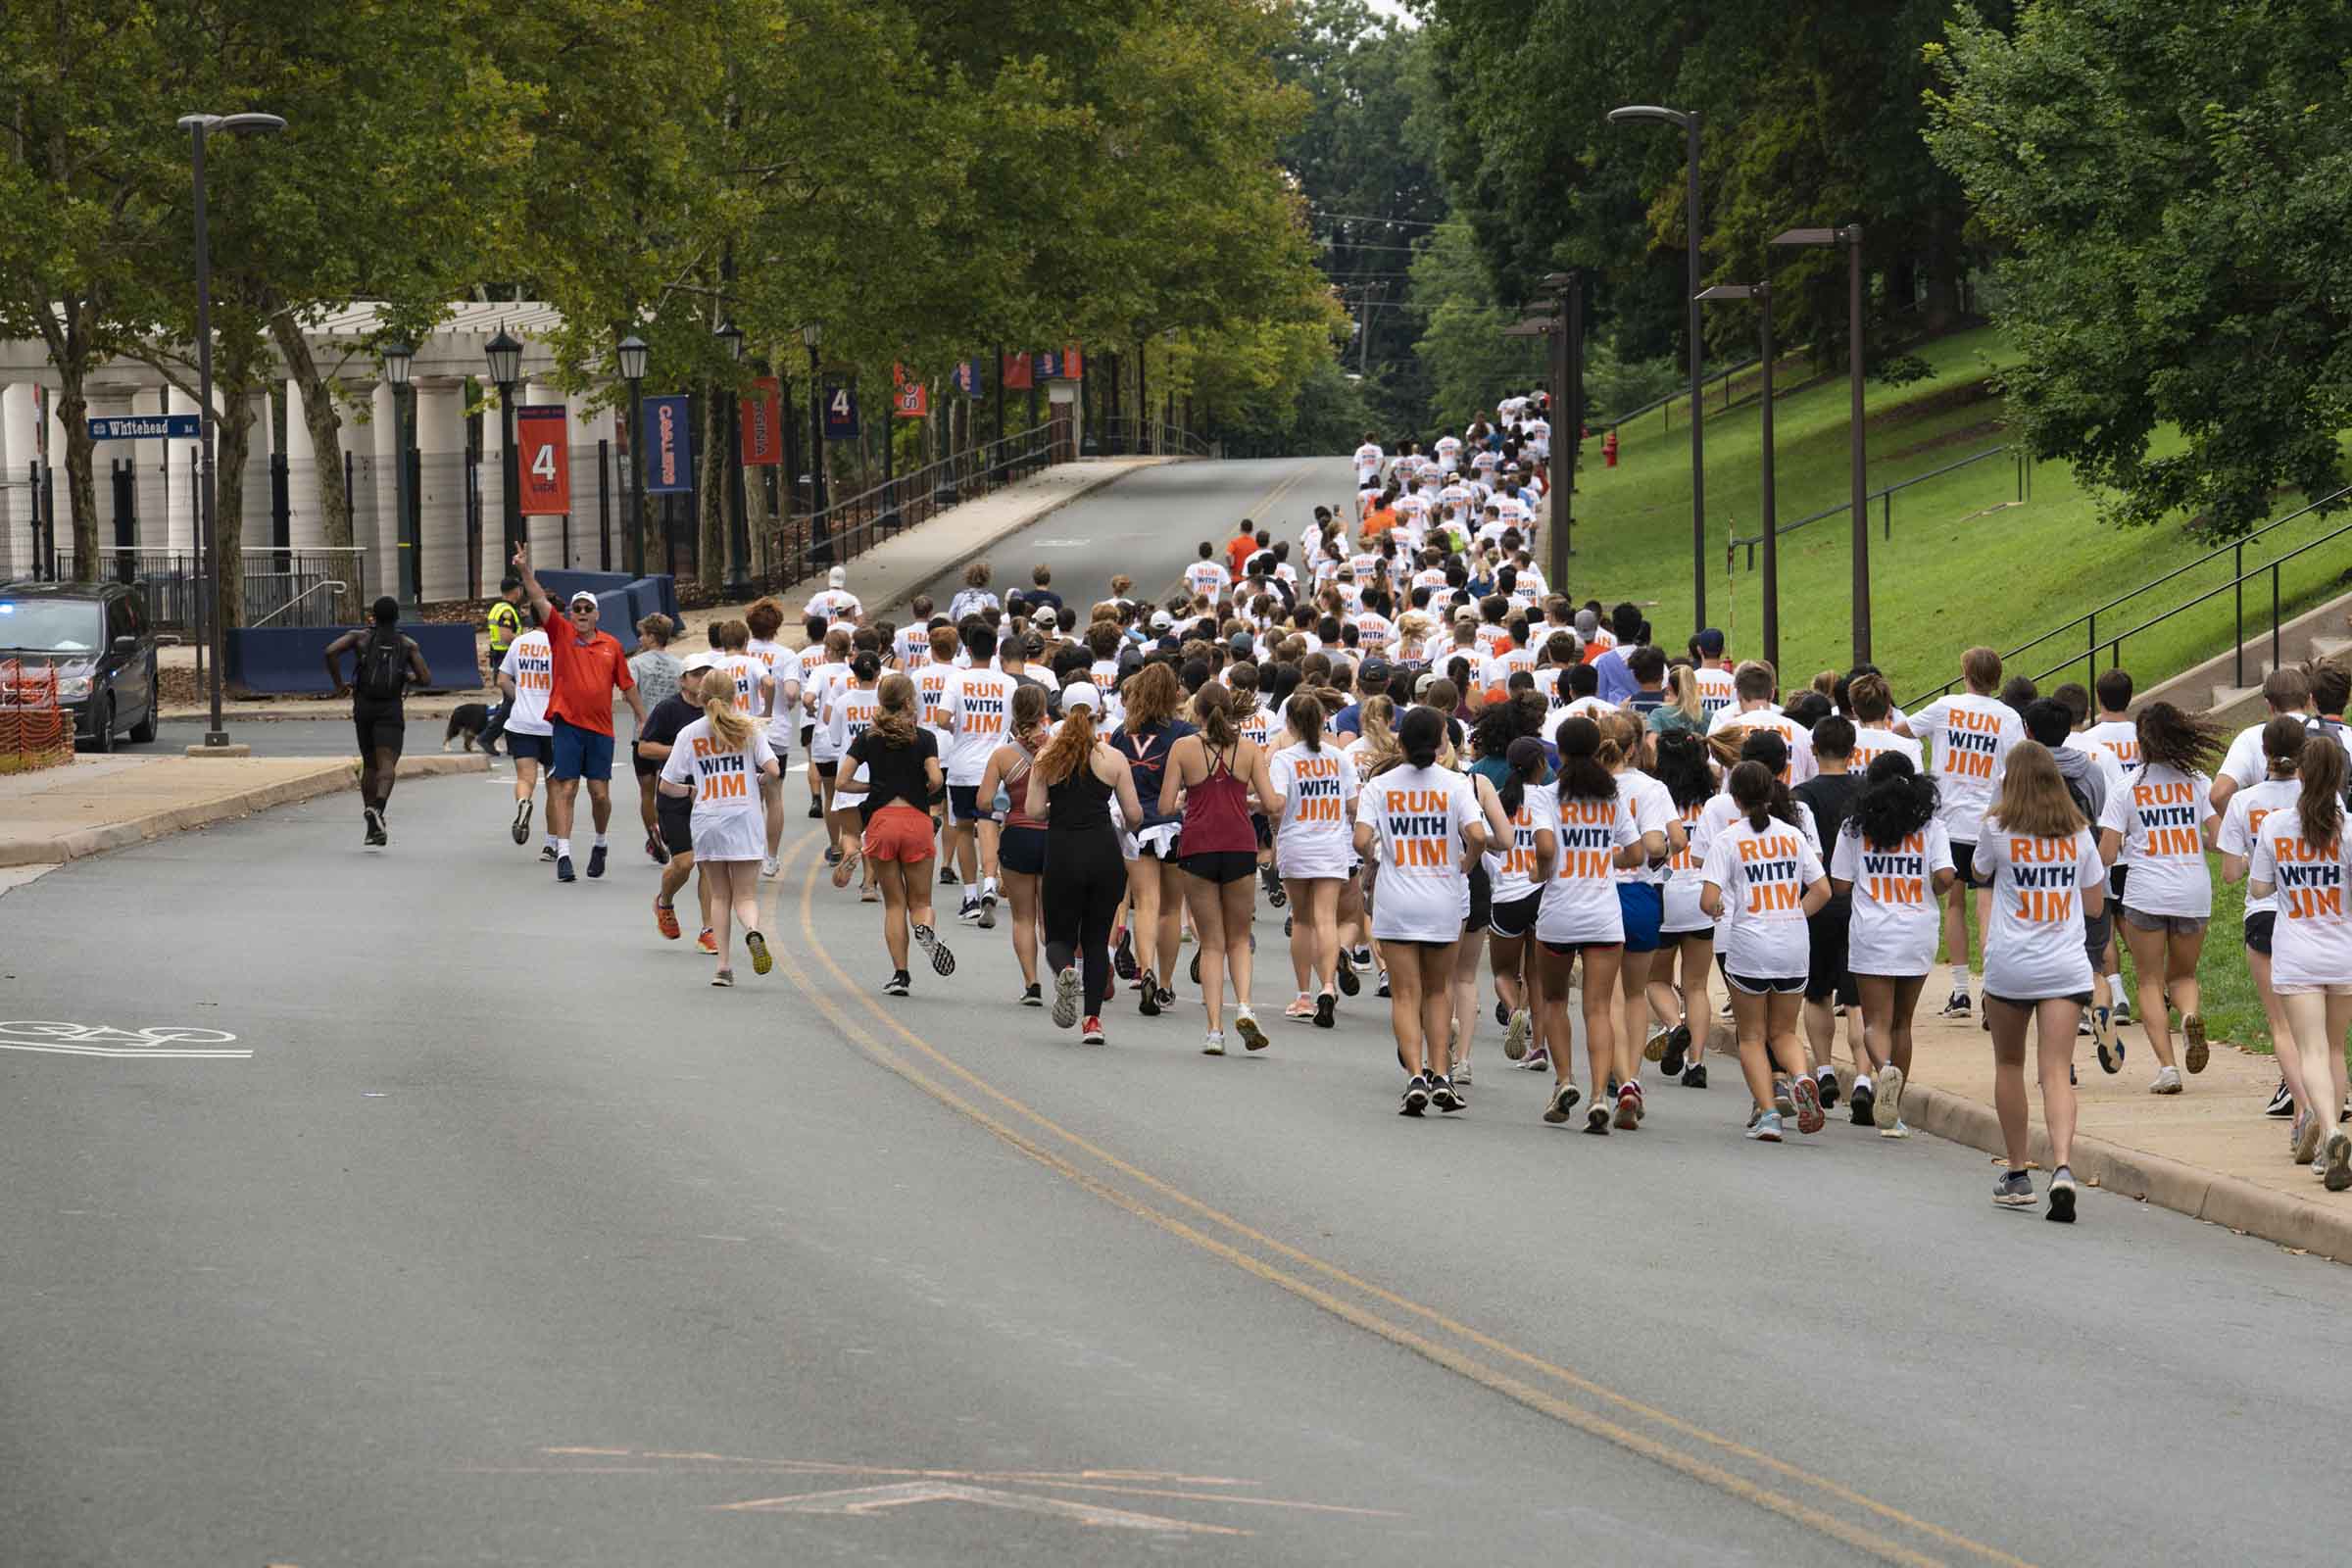 Hundreds of students in Run with Jim tee-shirts run down Alderman Road.